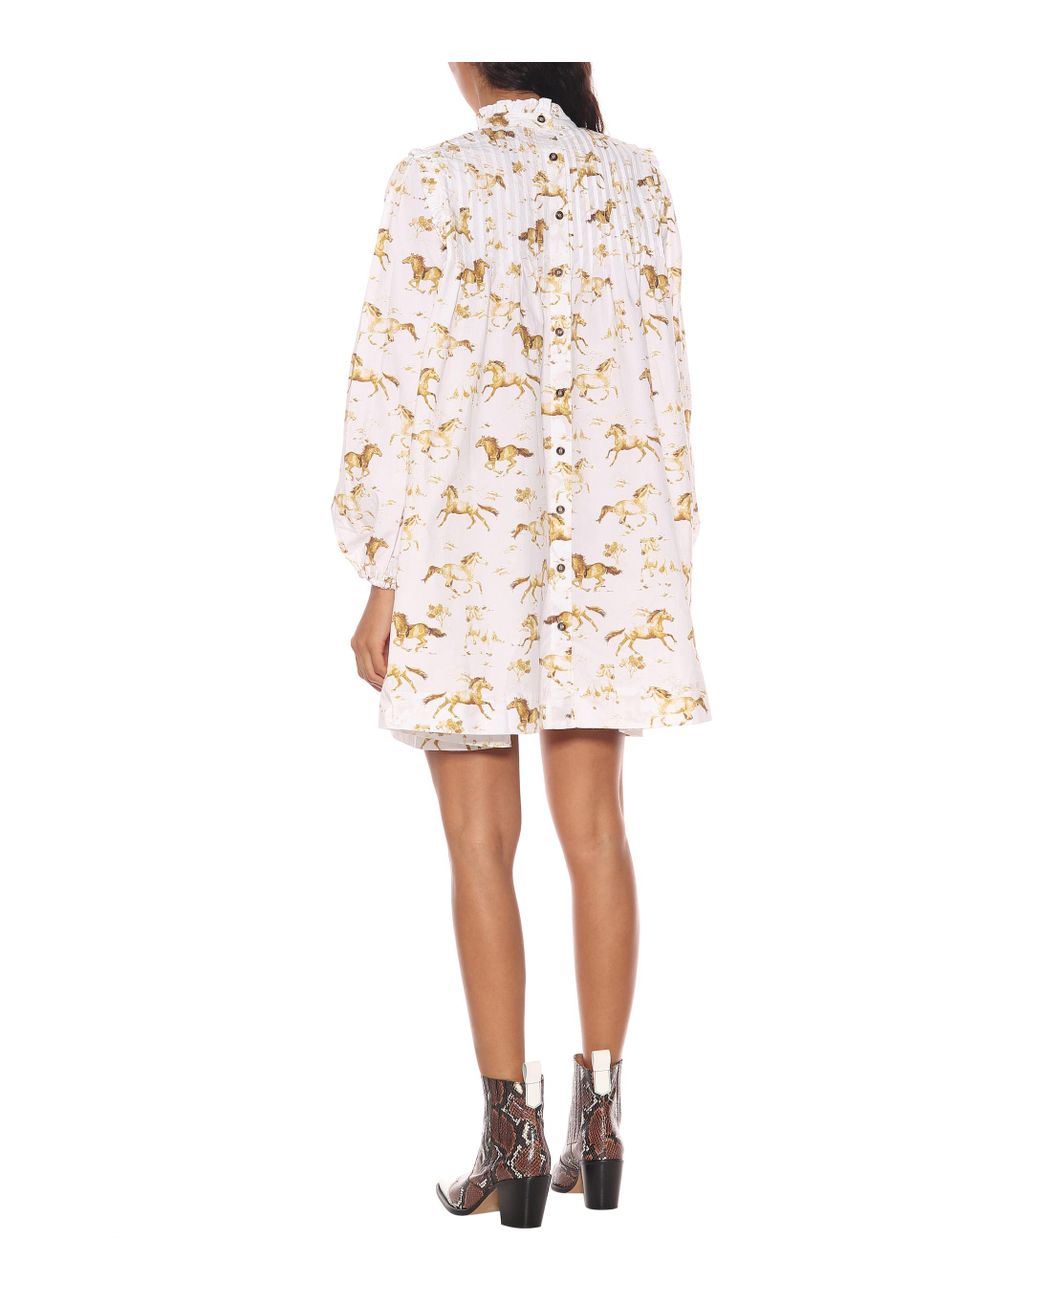 Ganni Horse-printed Cotton Dress in White | Lyst